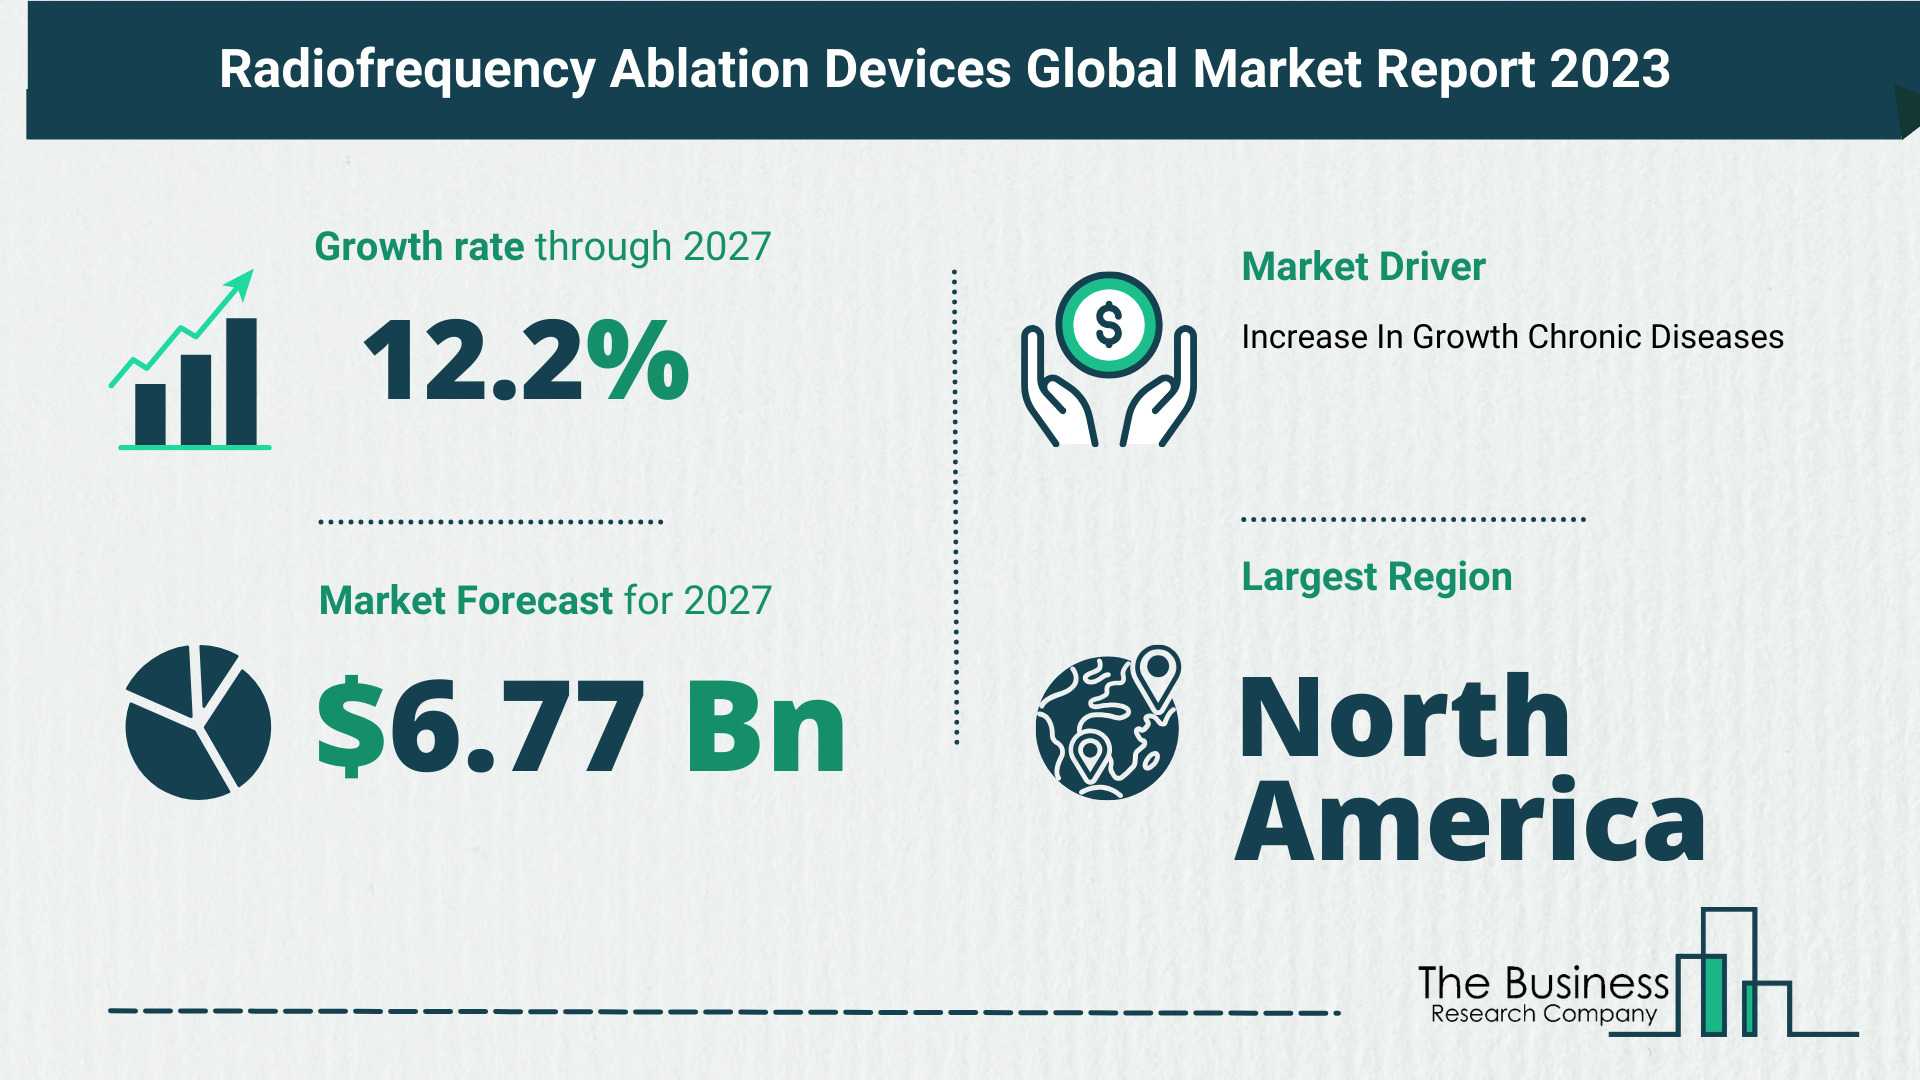 Radiofrequency Ablation Devices Market Forecast 2023: Forecast Market Size, Drivers And Key Segments